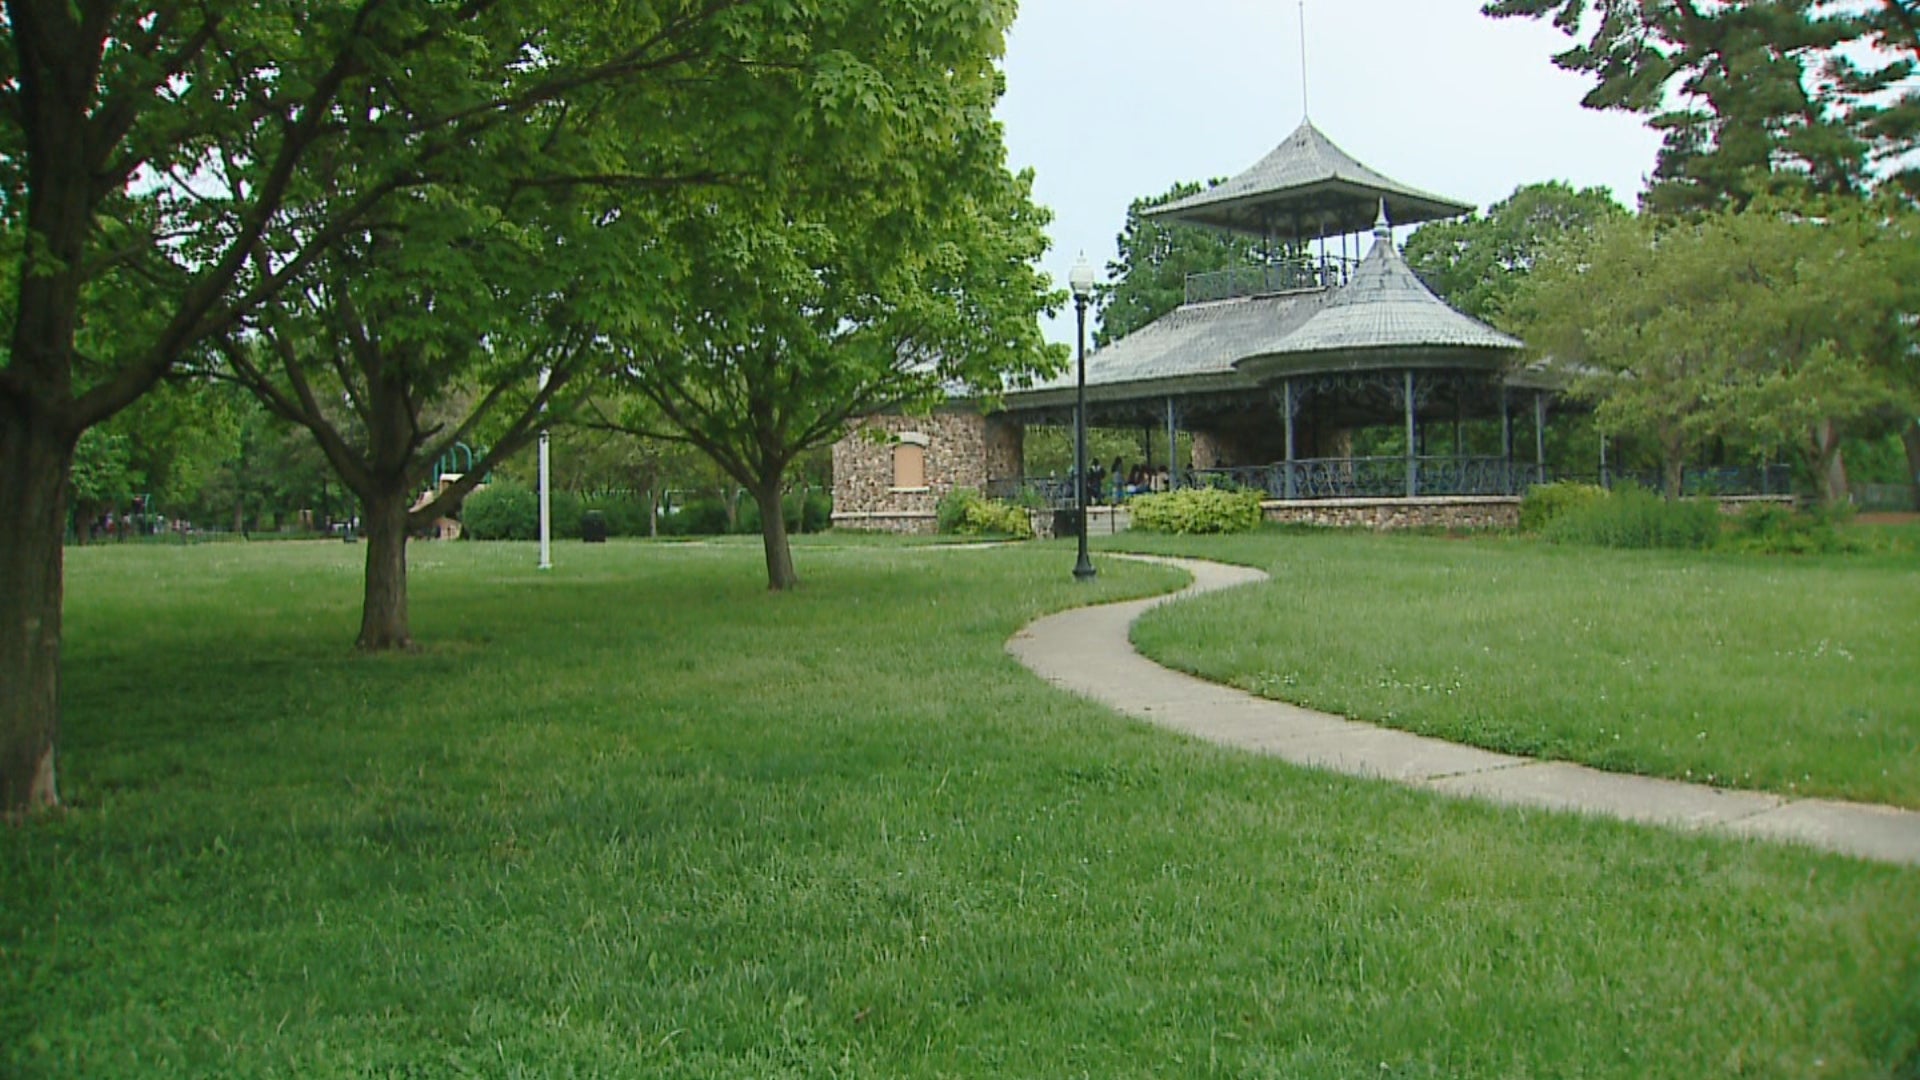 What improvements are coming to Garfield Park